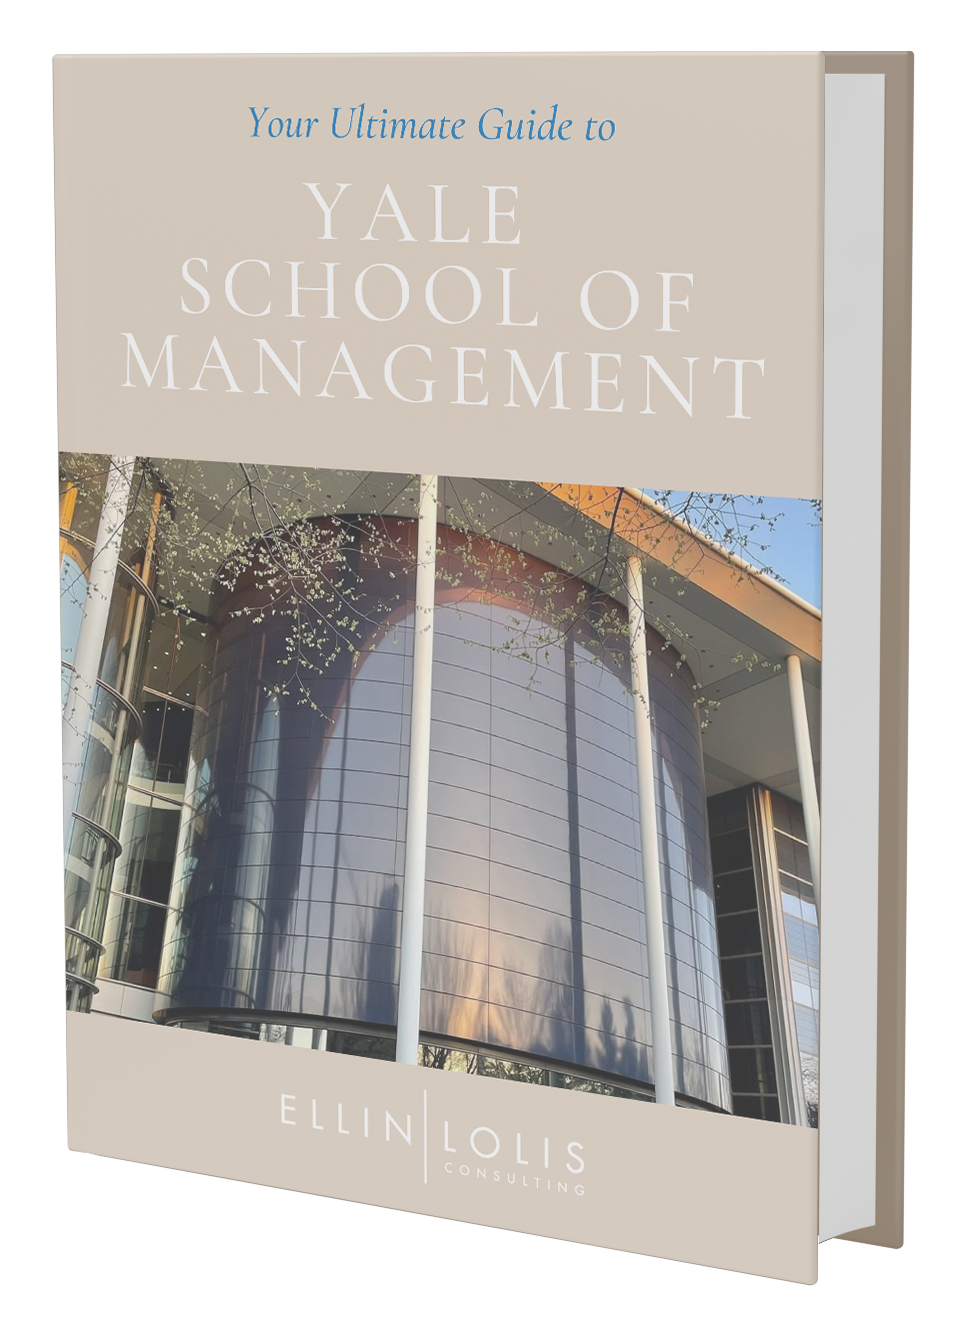 Your Ultimate Guide to Yale School of Management